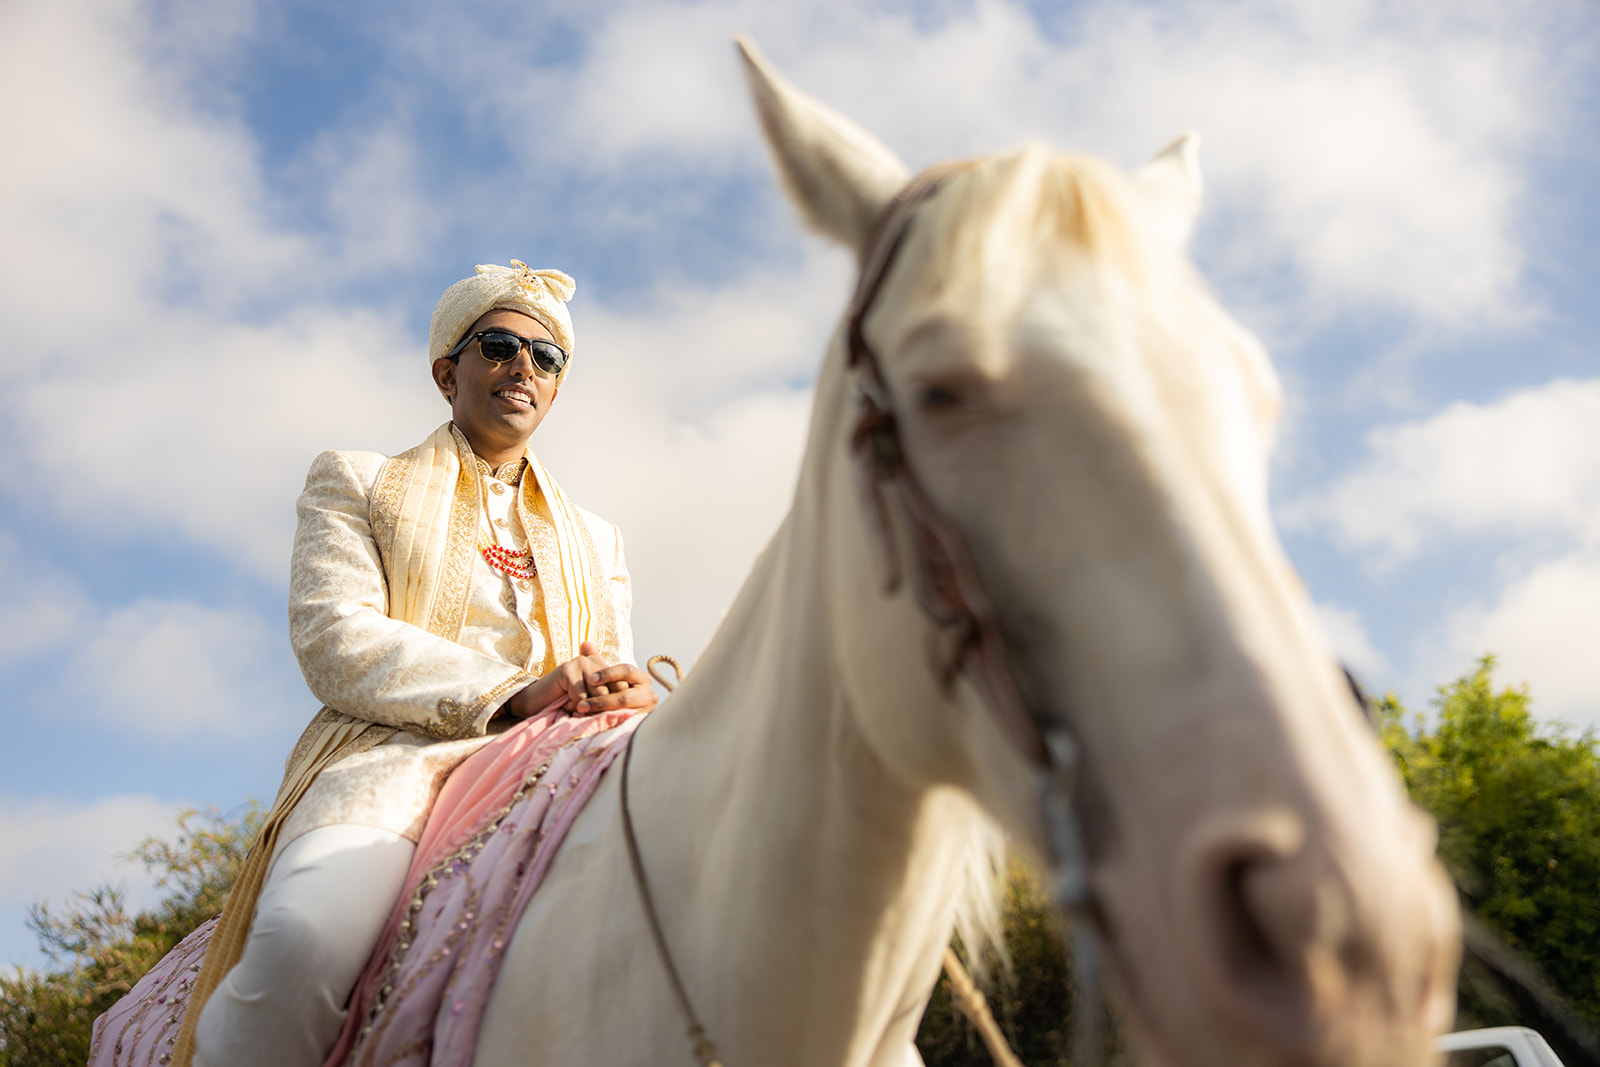 Groom rides on horse duirng indian wedding Barat in the bay area.